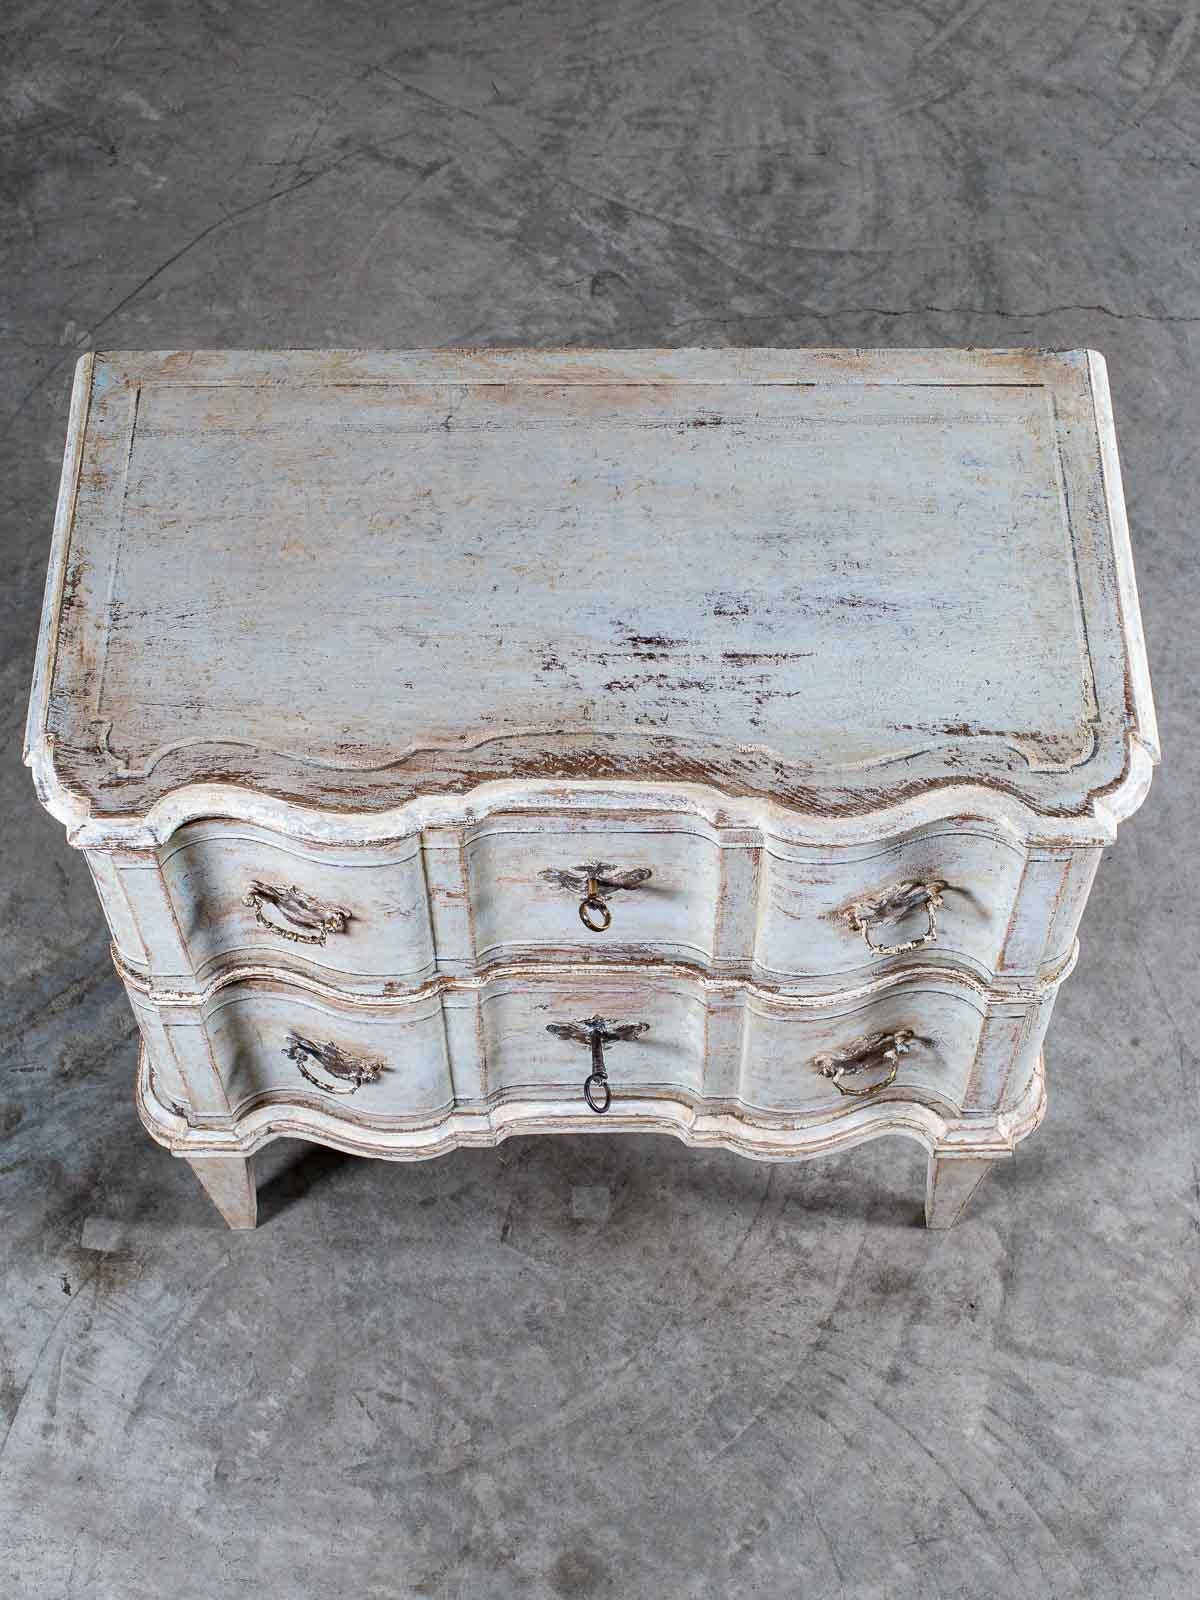 A striking antique French arbalette front painted chest of drawers from France, circa 1770. Please enlarge the photographs to see the details that make this such a fine example of eighteenth century craftsmanship. The entire façade of this chest of